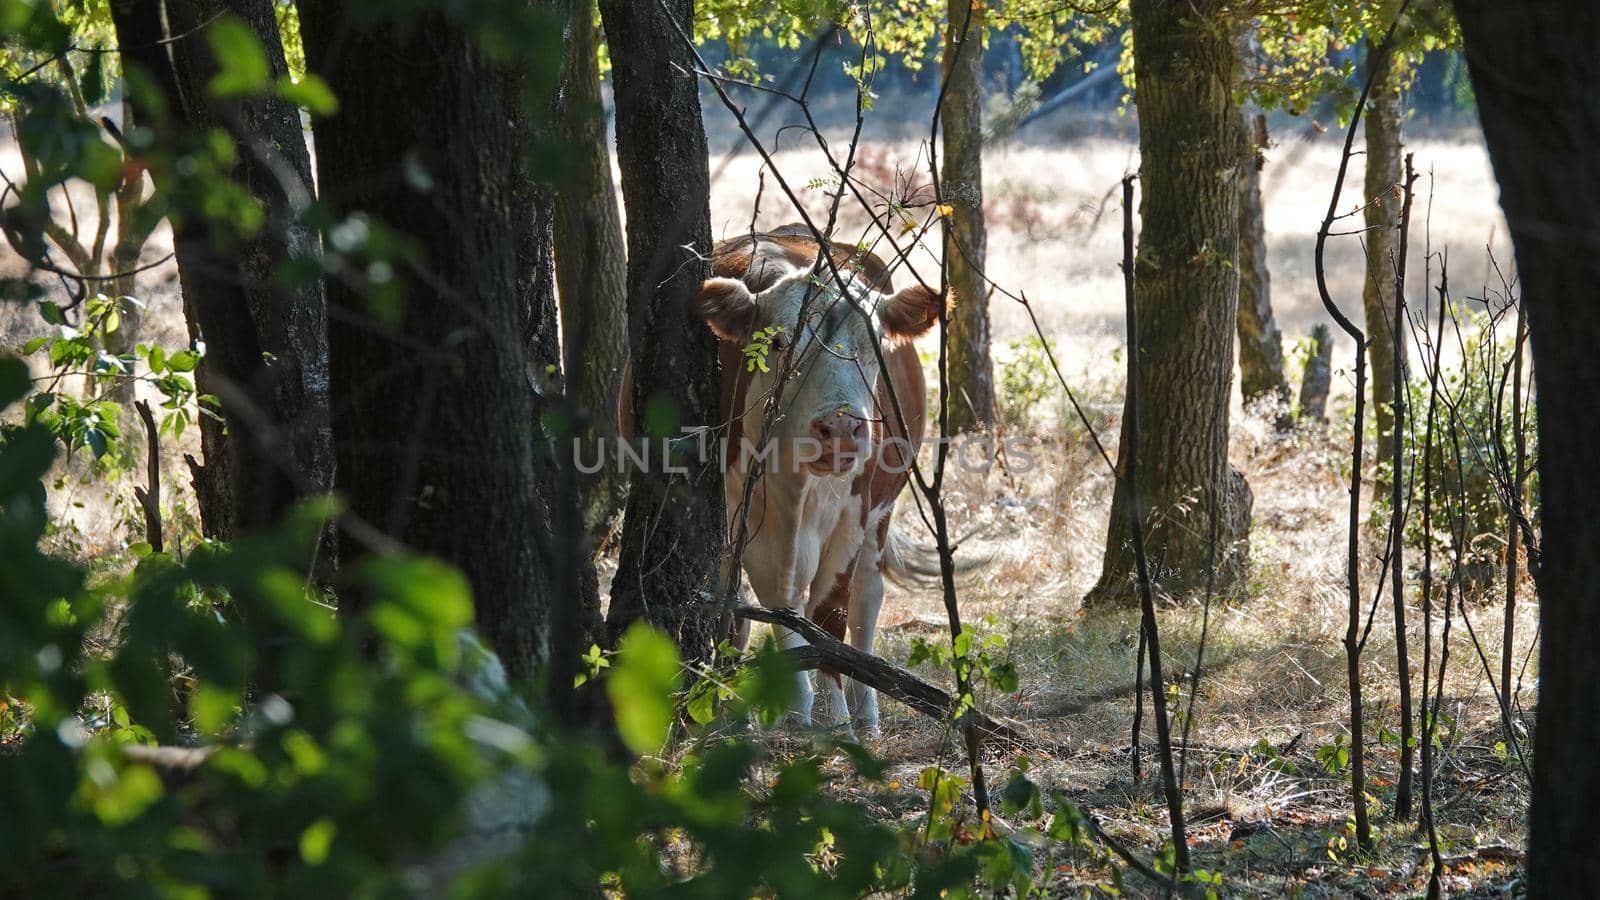 Red and white spotted cow is scratching it's back on the bark of a tree. Location: Springendal, the Netherlands